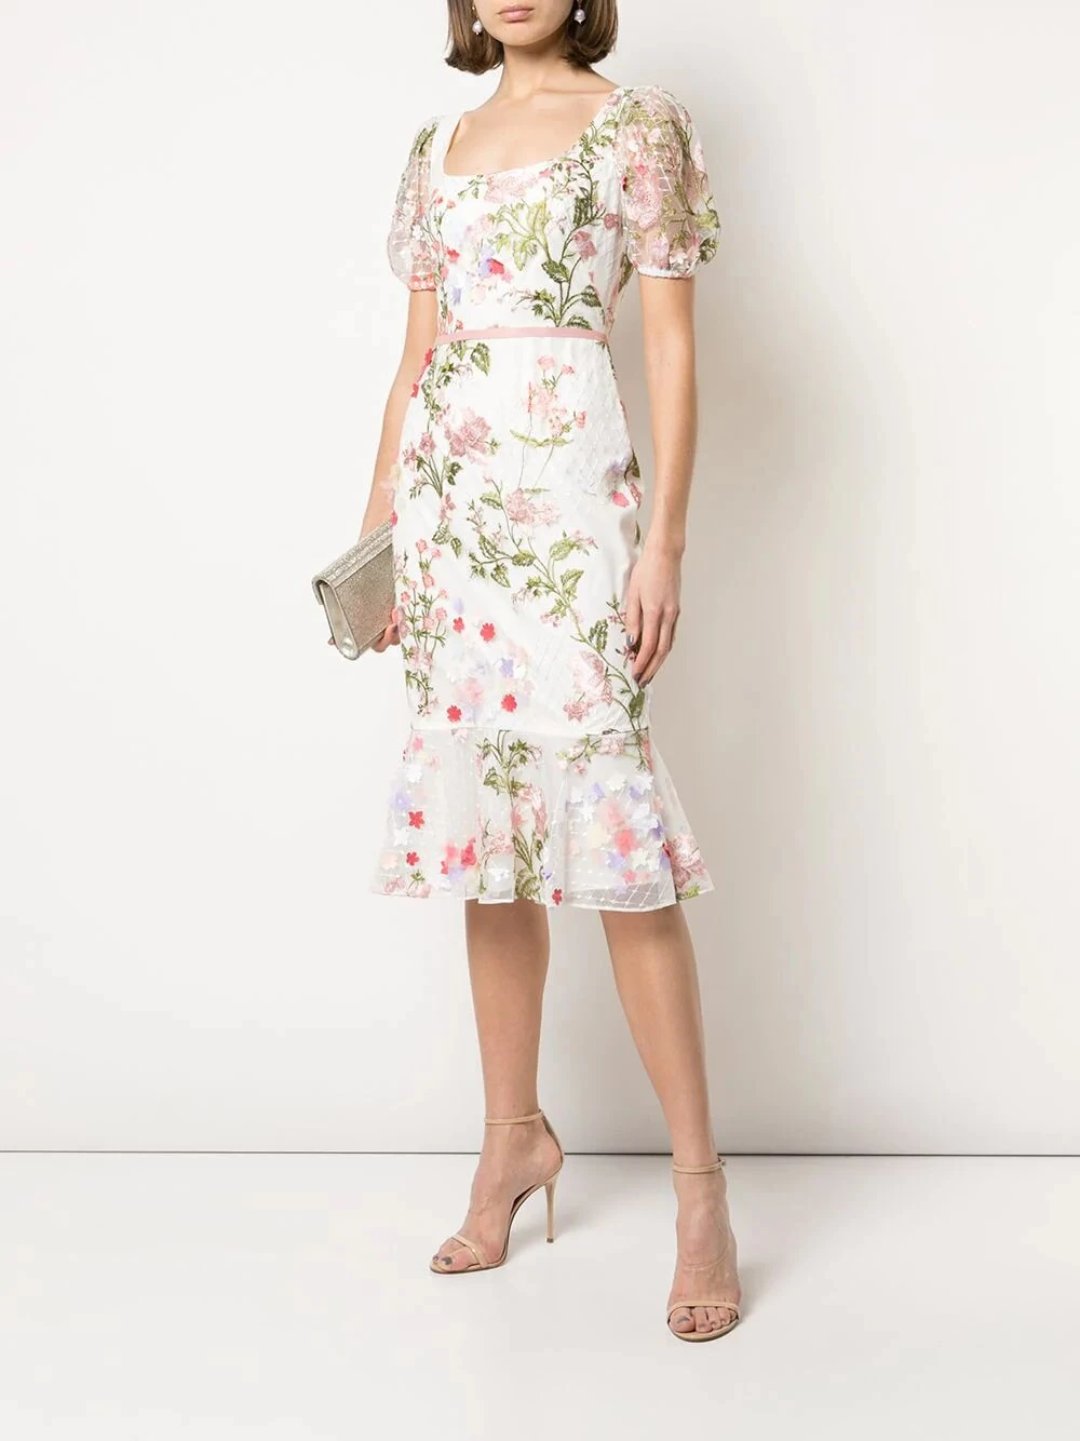 3D Floral Embroidered Cocktail Dress 